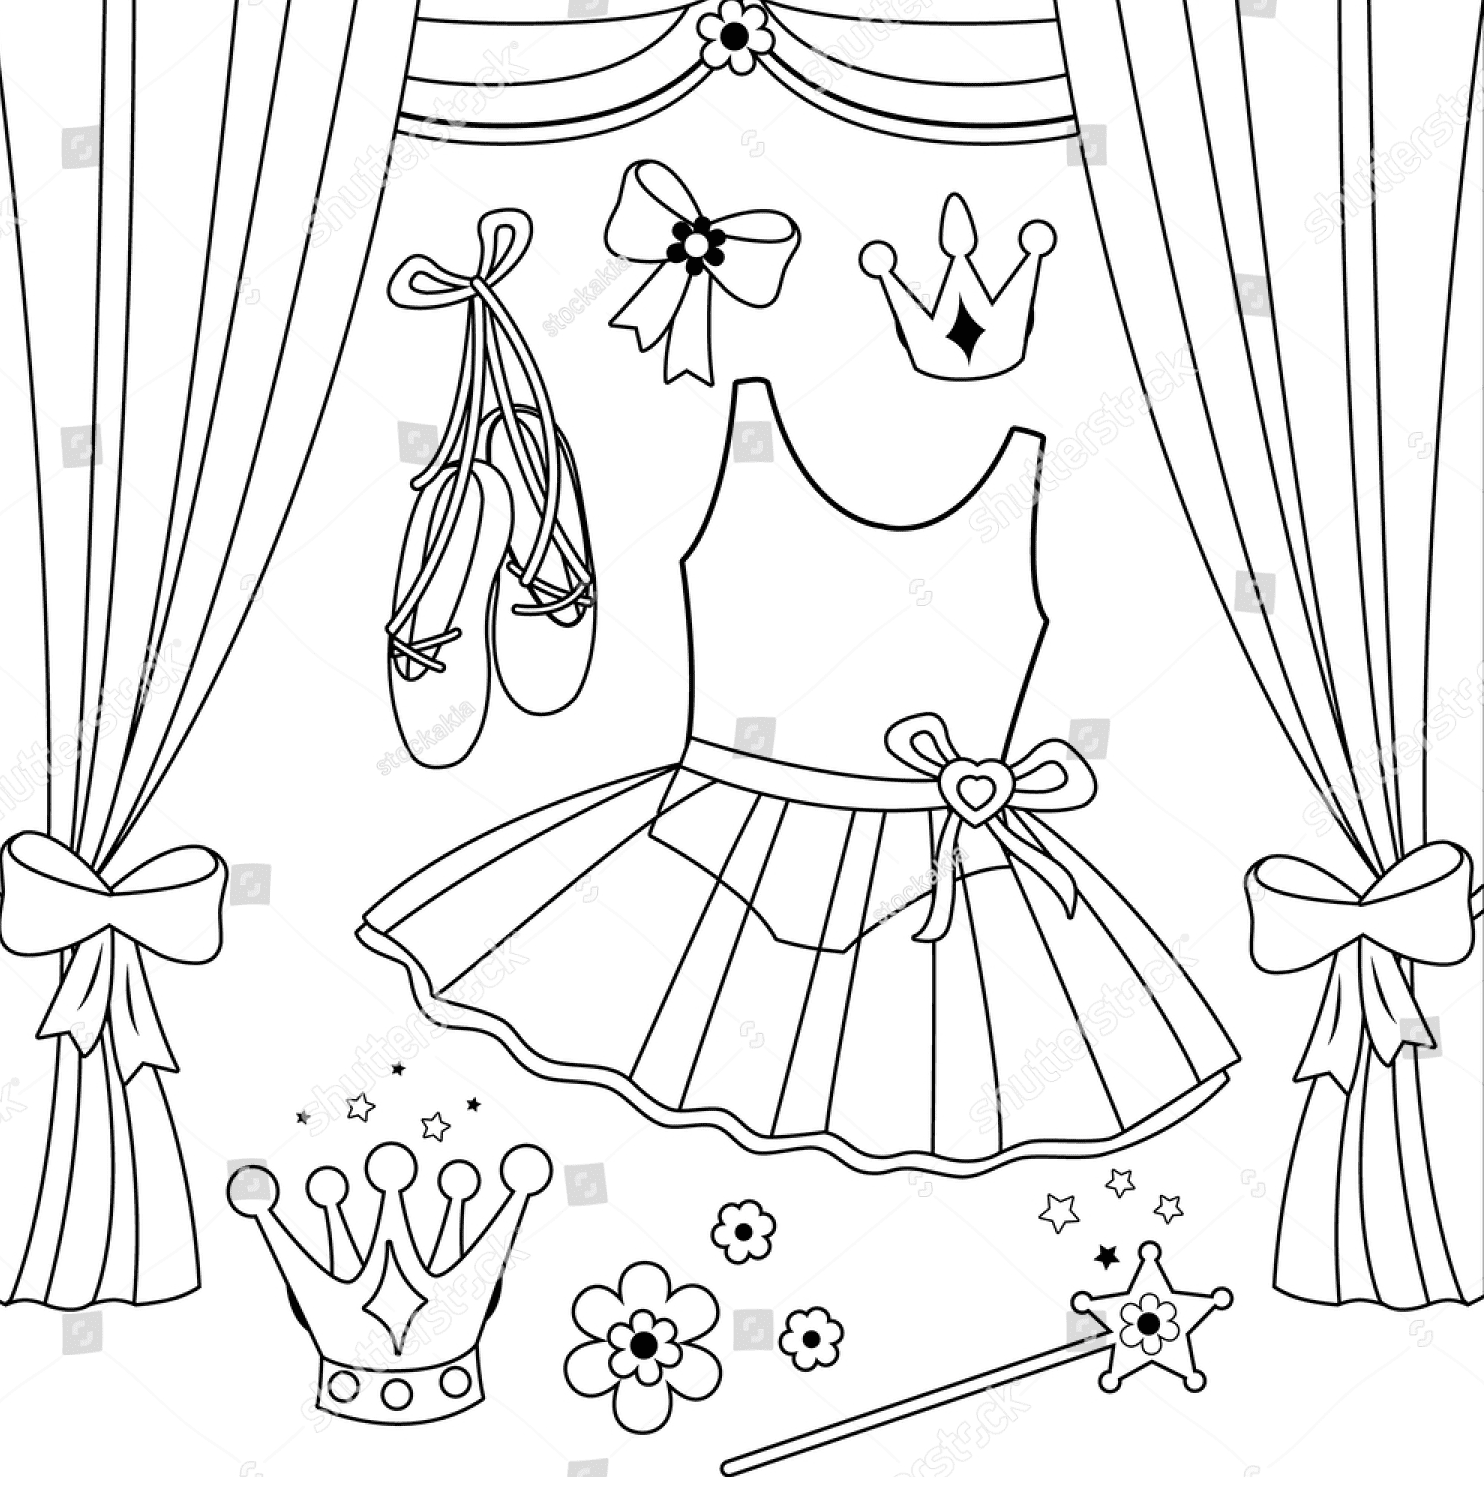 Cute Ballerina Dress and Shoes Coloring Page